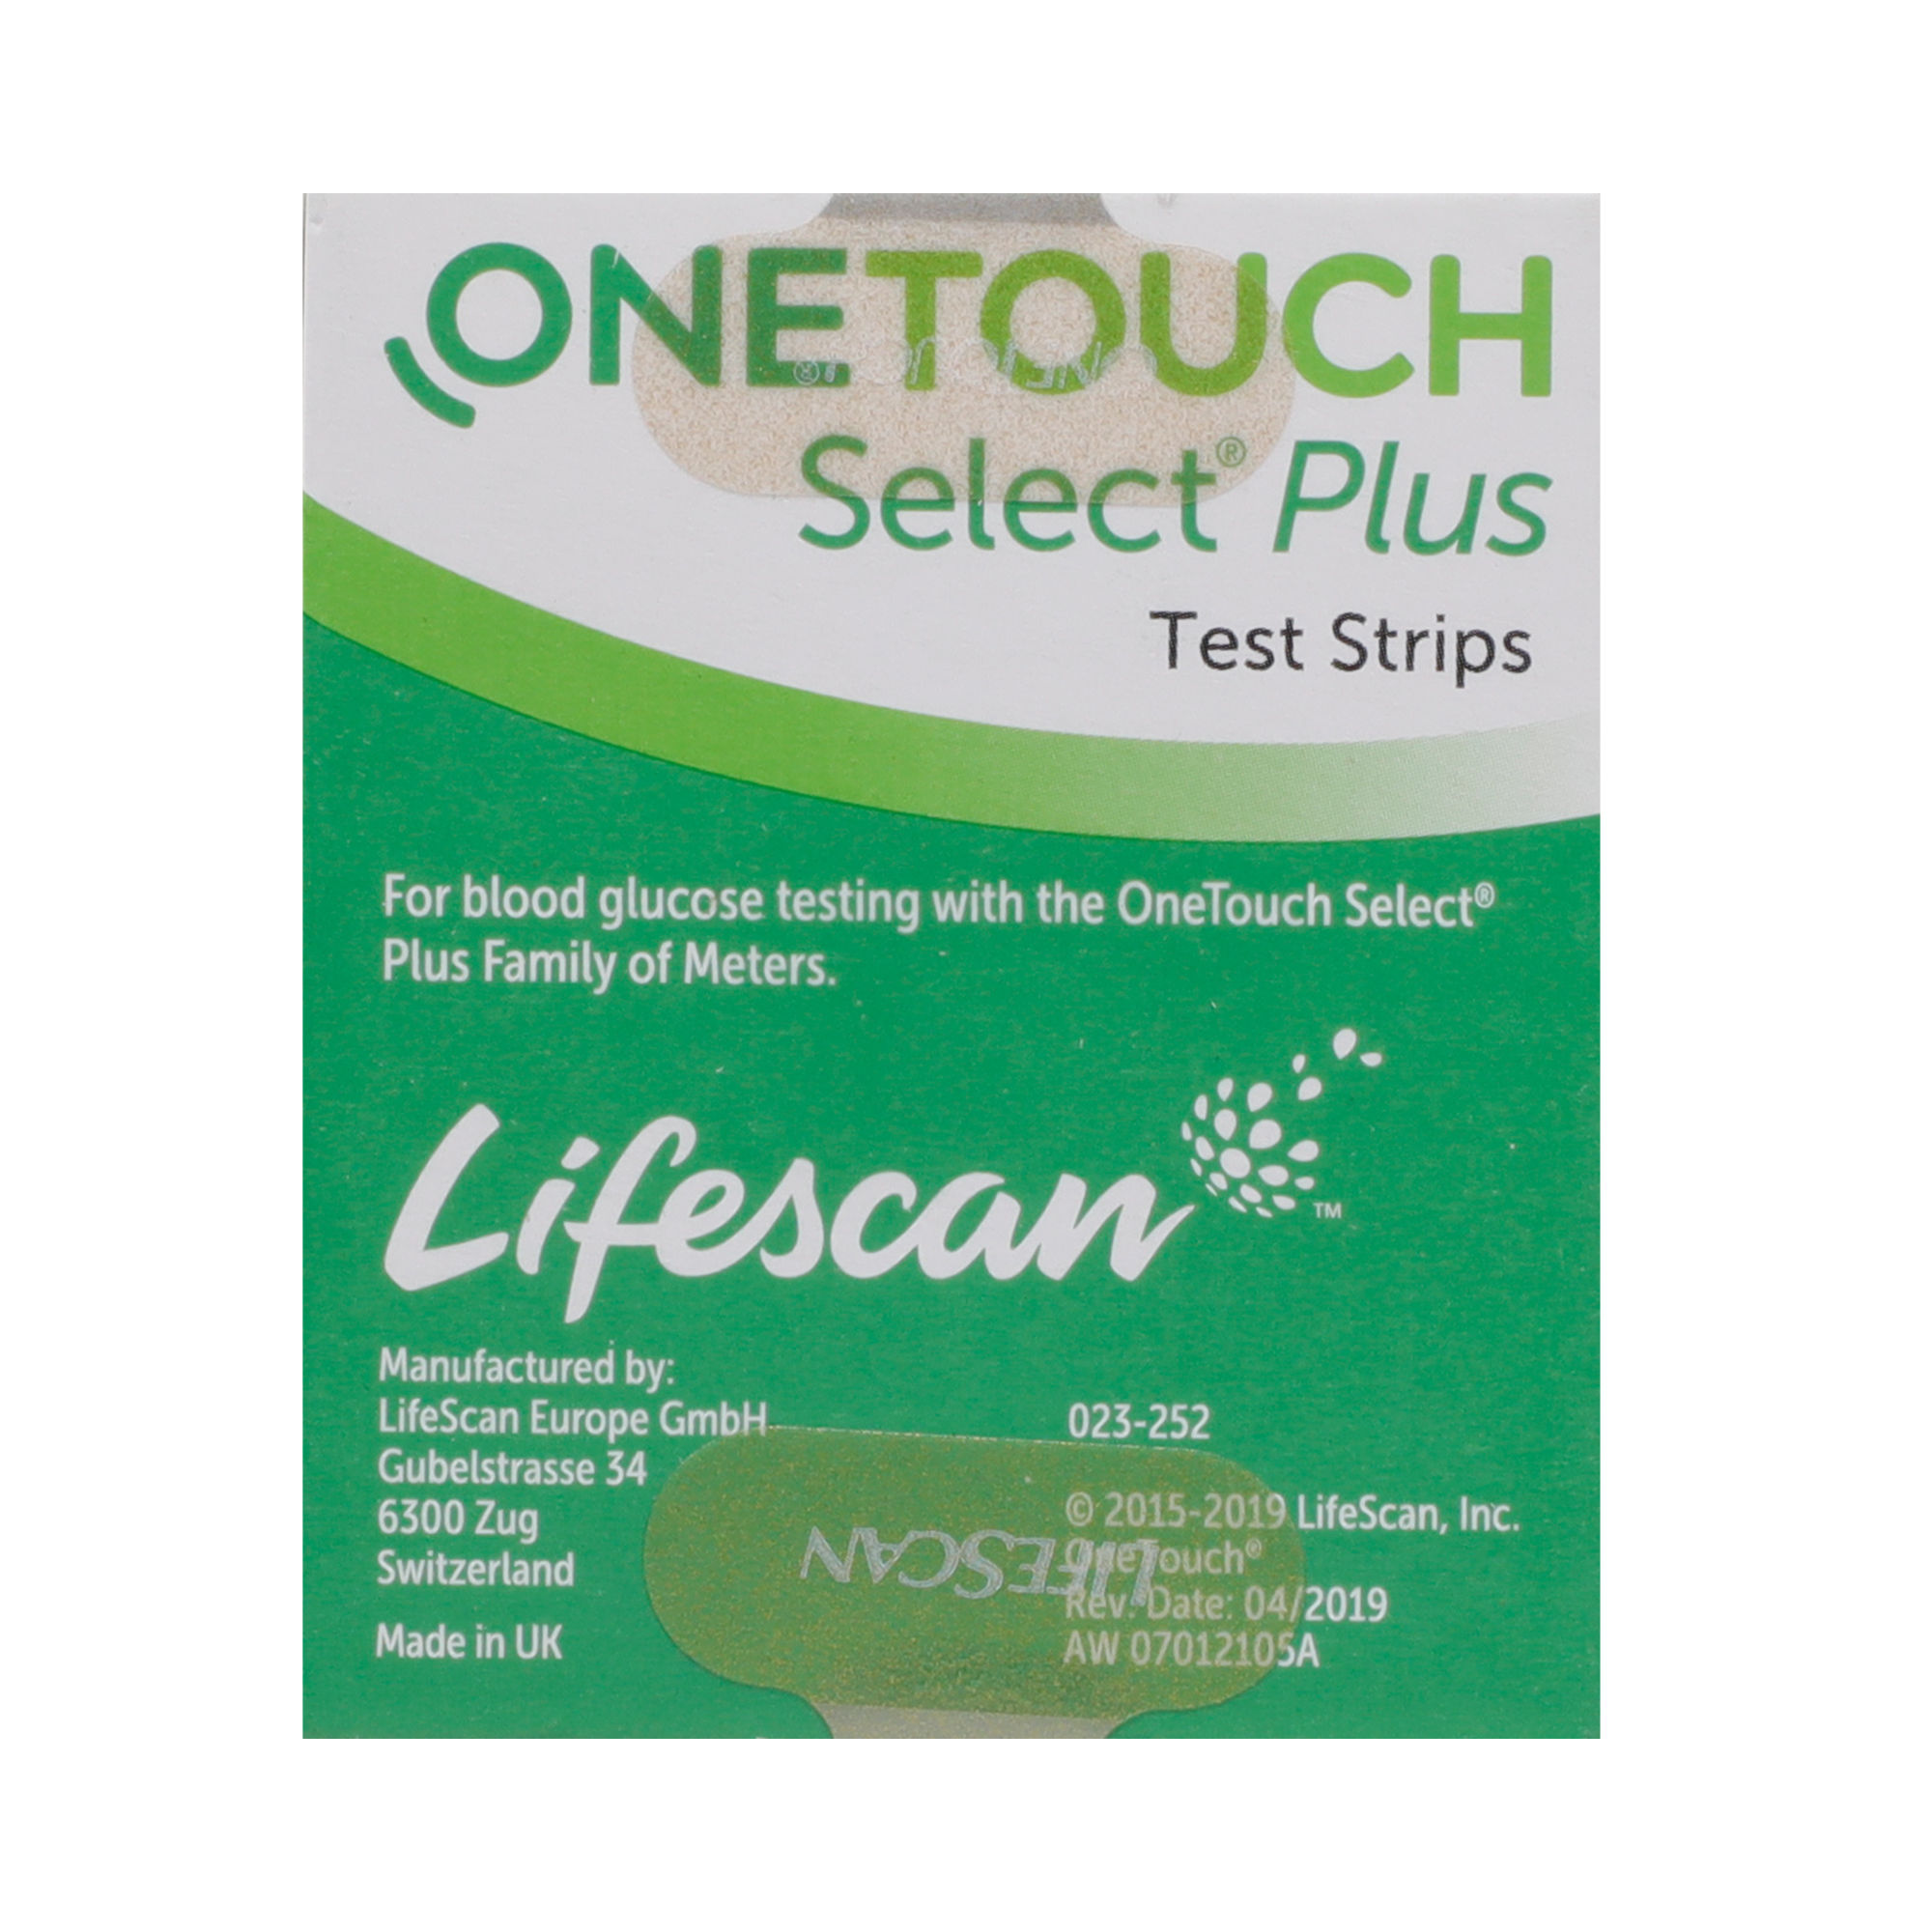 Buy OneTouch Select Plus Test Strips, 50 Count Online